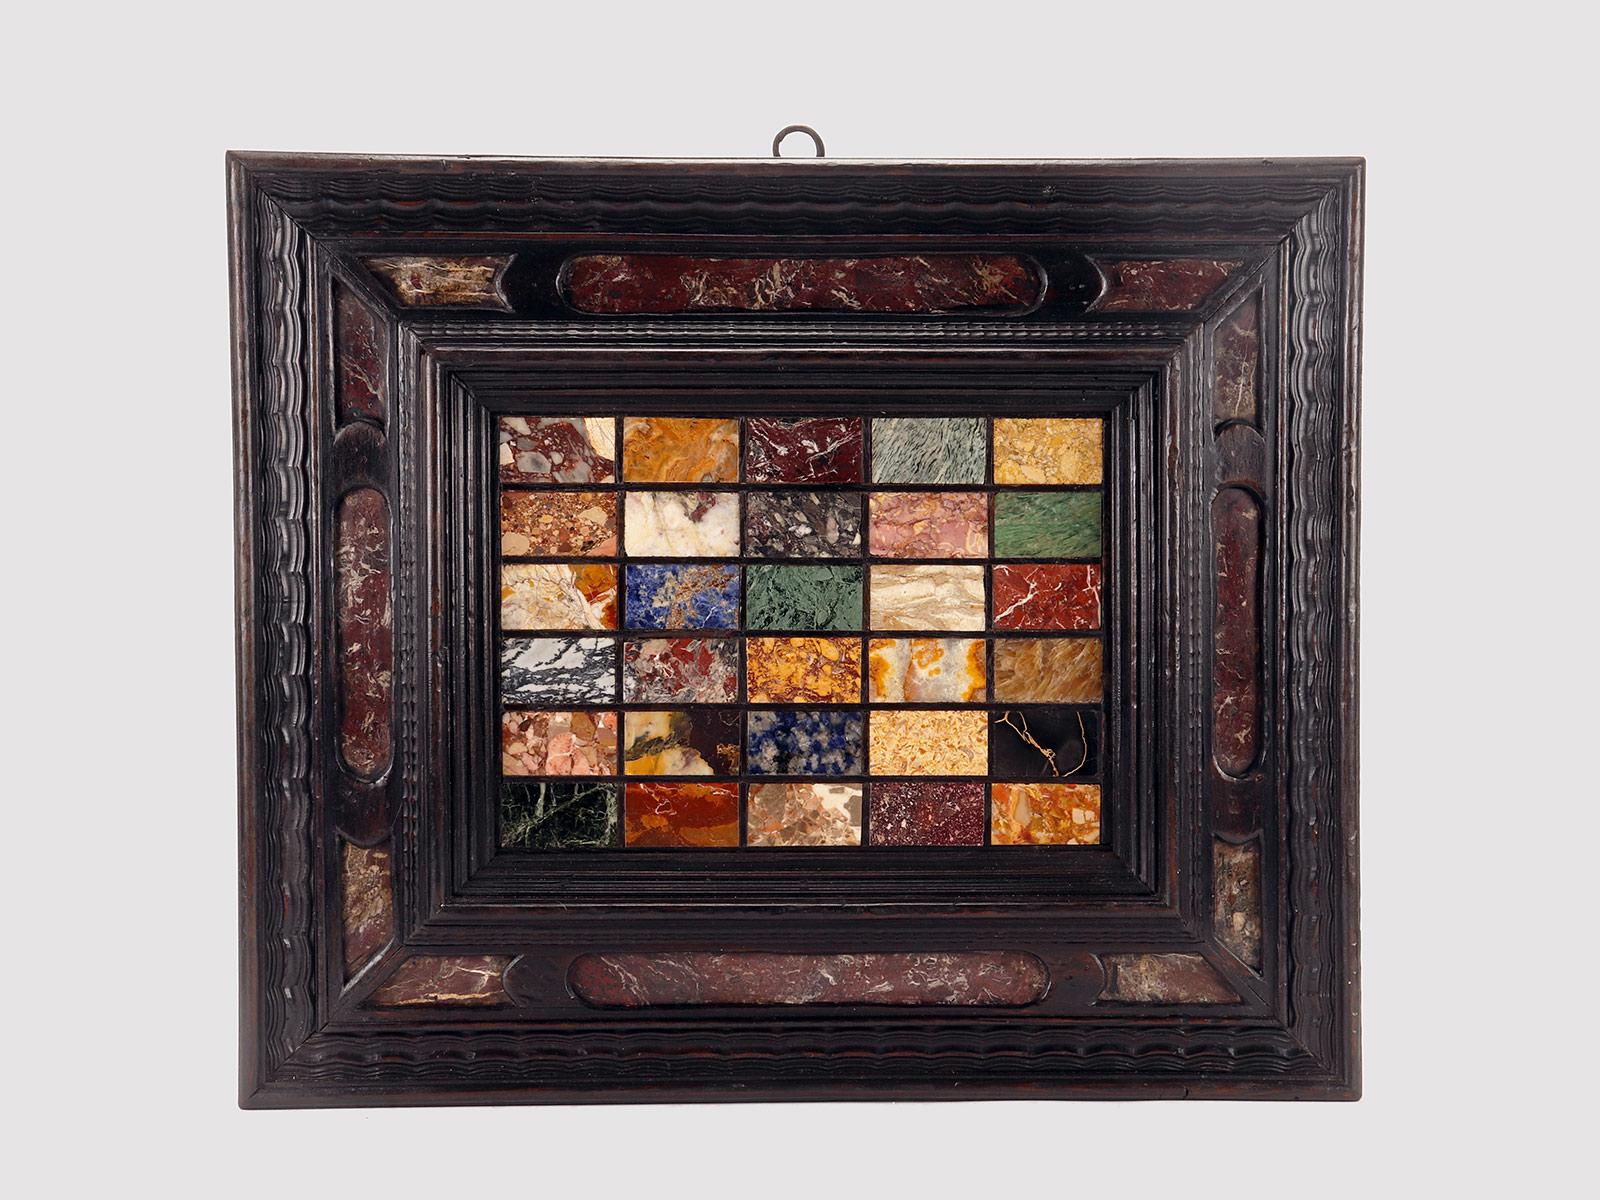 A selection of antique Grand Tour marbles, profiled in black (ebony wood), inserted in an ebonized walnut wood frame, with red Levanto marble inlays. the back of the frame with parts in larch wood. The sample panel is inserted in marquetry of 30